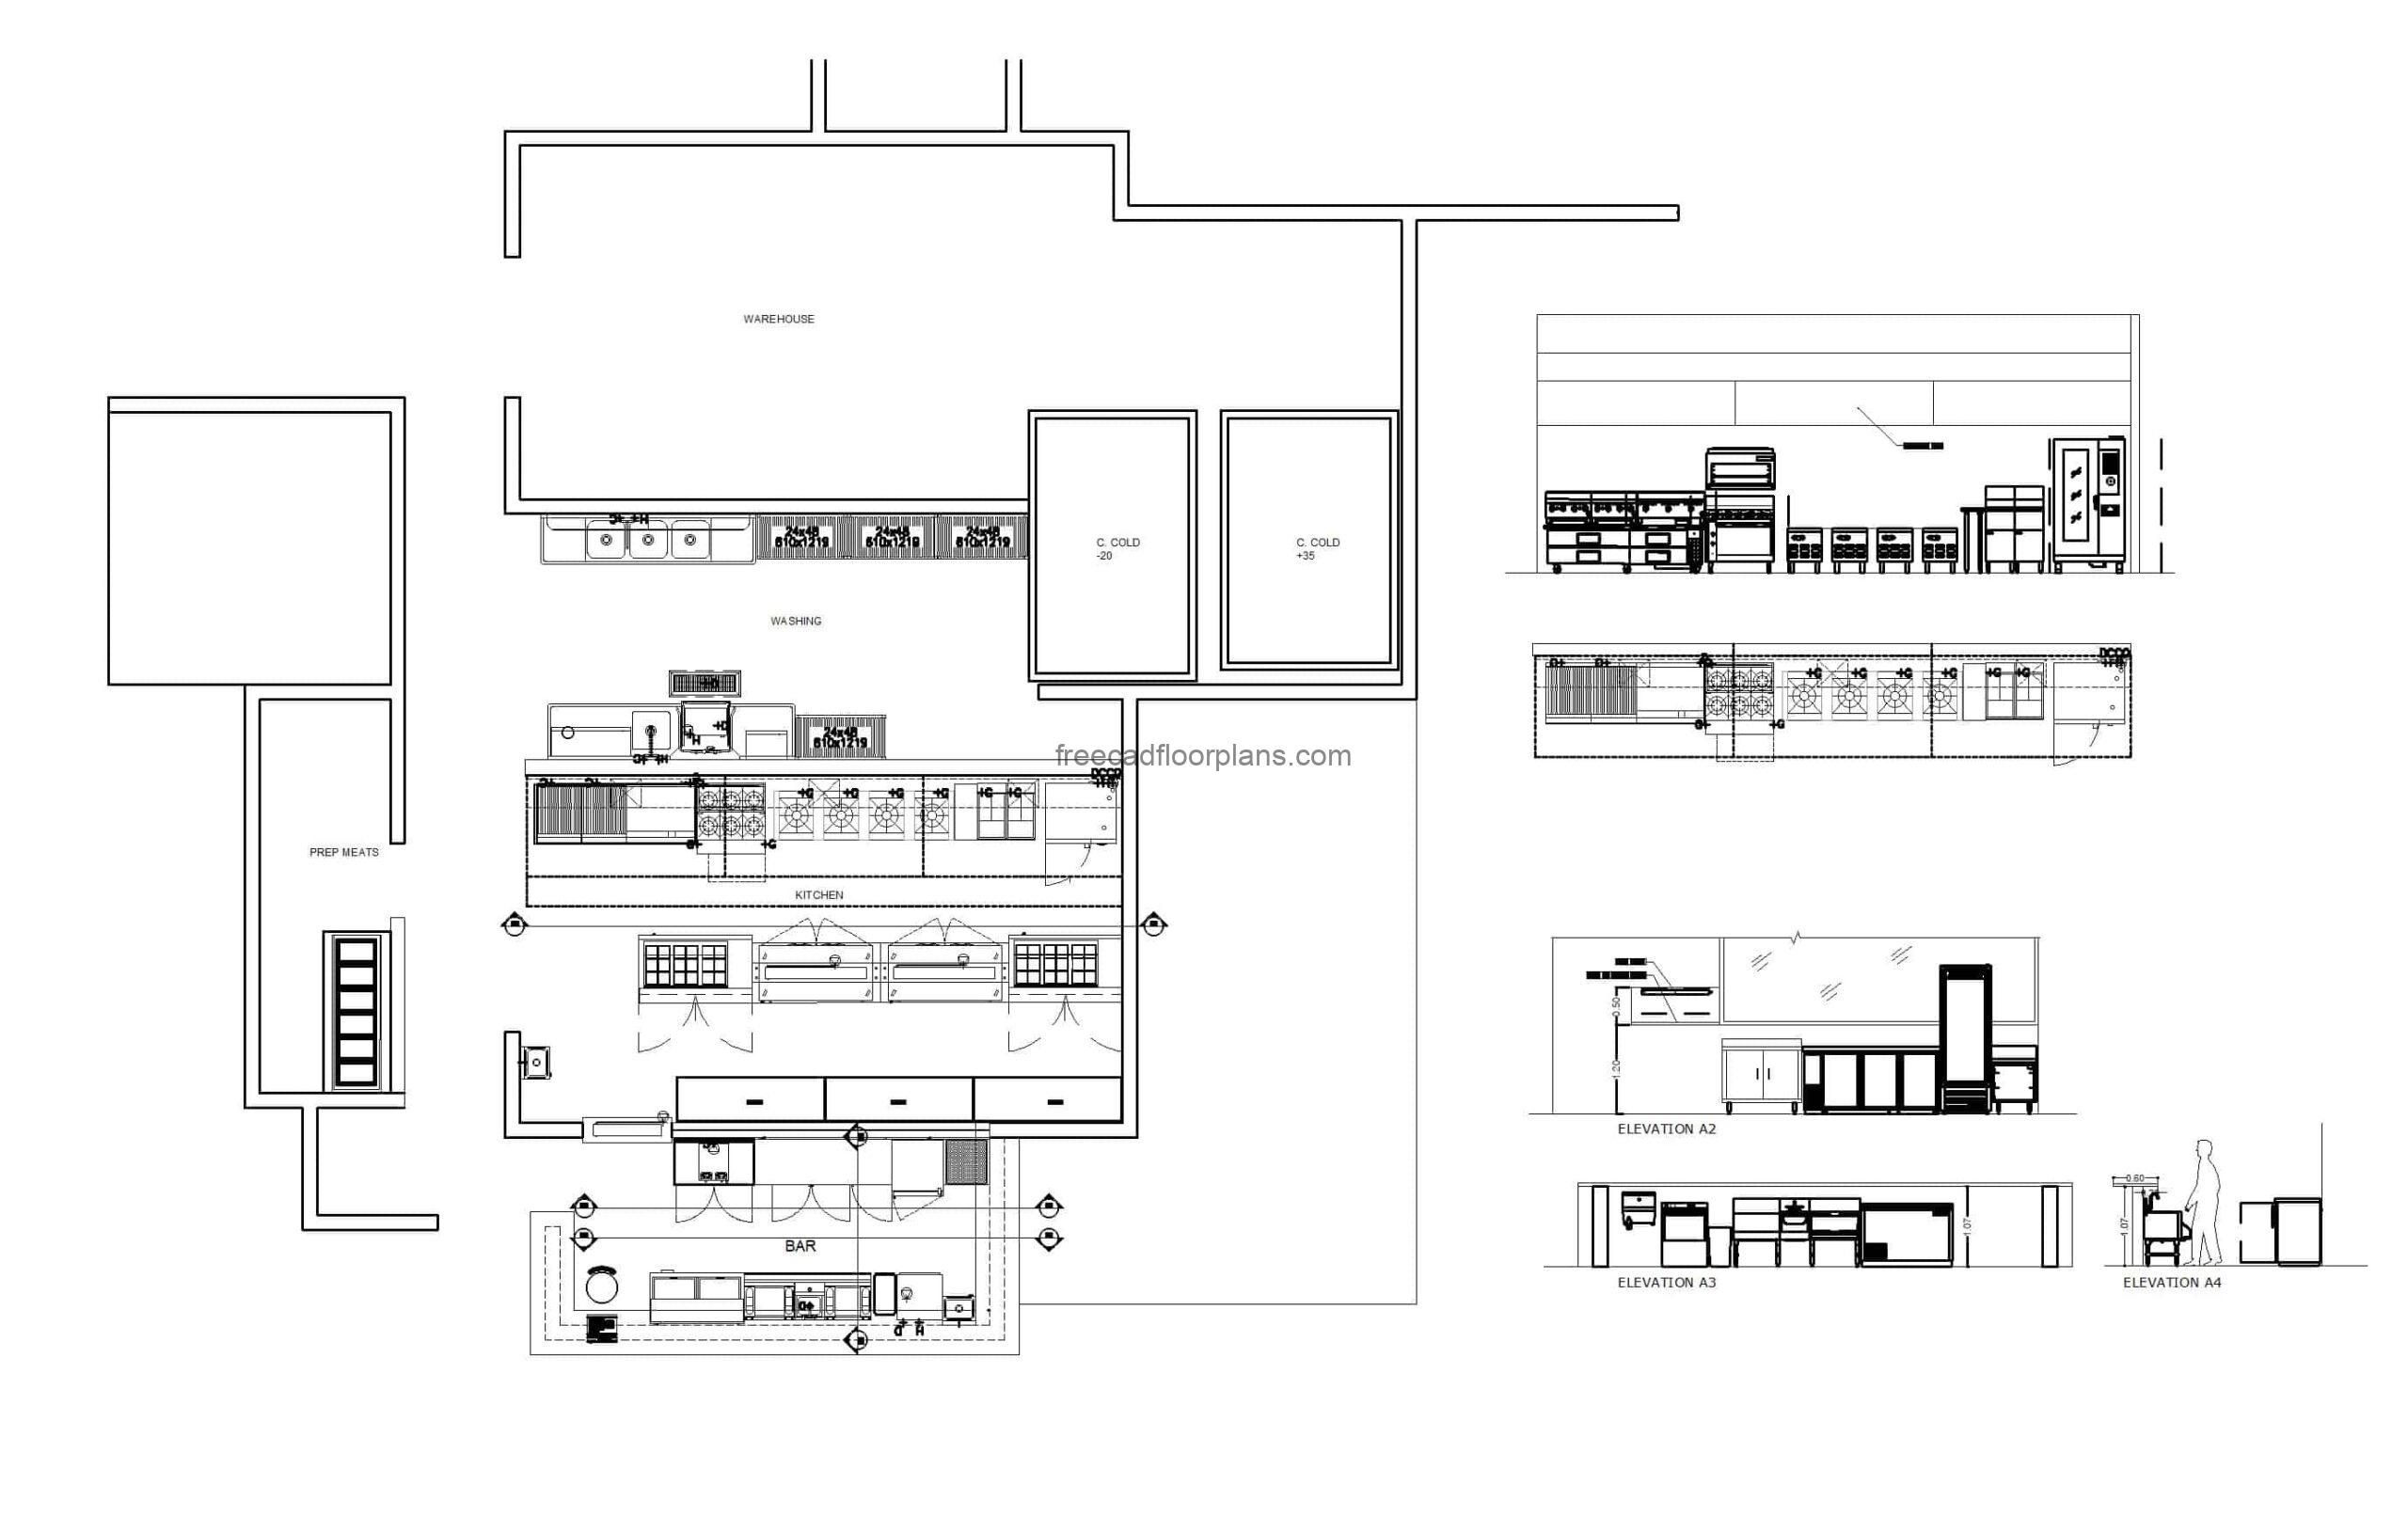 autocad drawing of a full commercial kitchen layout, plan and elevation detailed views, dwg file free for download